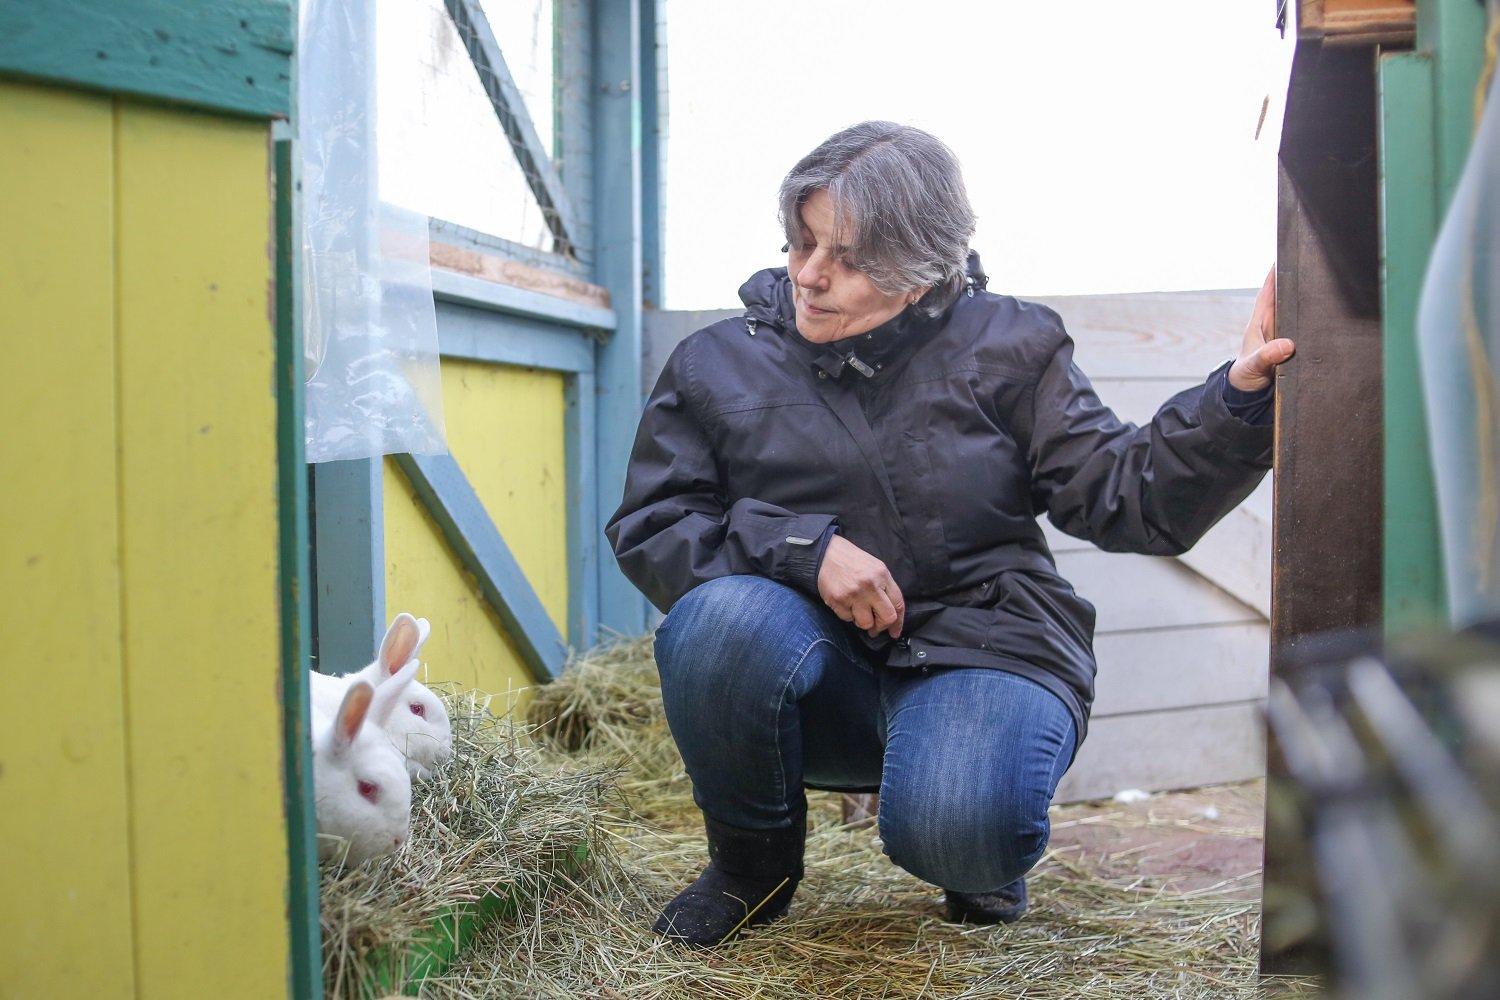 Sorelle Saidman is wearing a black rain jacket and jeans. She has short grey hair and is crouching in the centre of the frame, looking at the two white rabbits with red eyes to the left of the frame. She is holding onto a fence frame; around her and the rabbits are wooden painted fences that comprise a partially-outdoor rabbit enclosure. In the background, the sky is white.